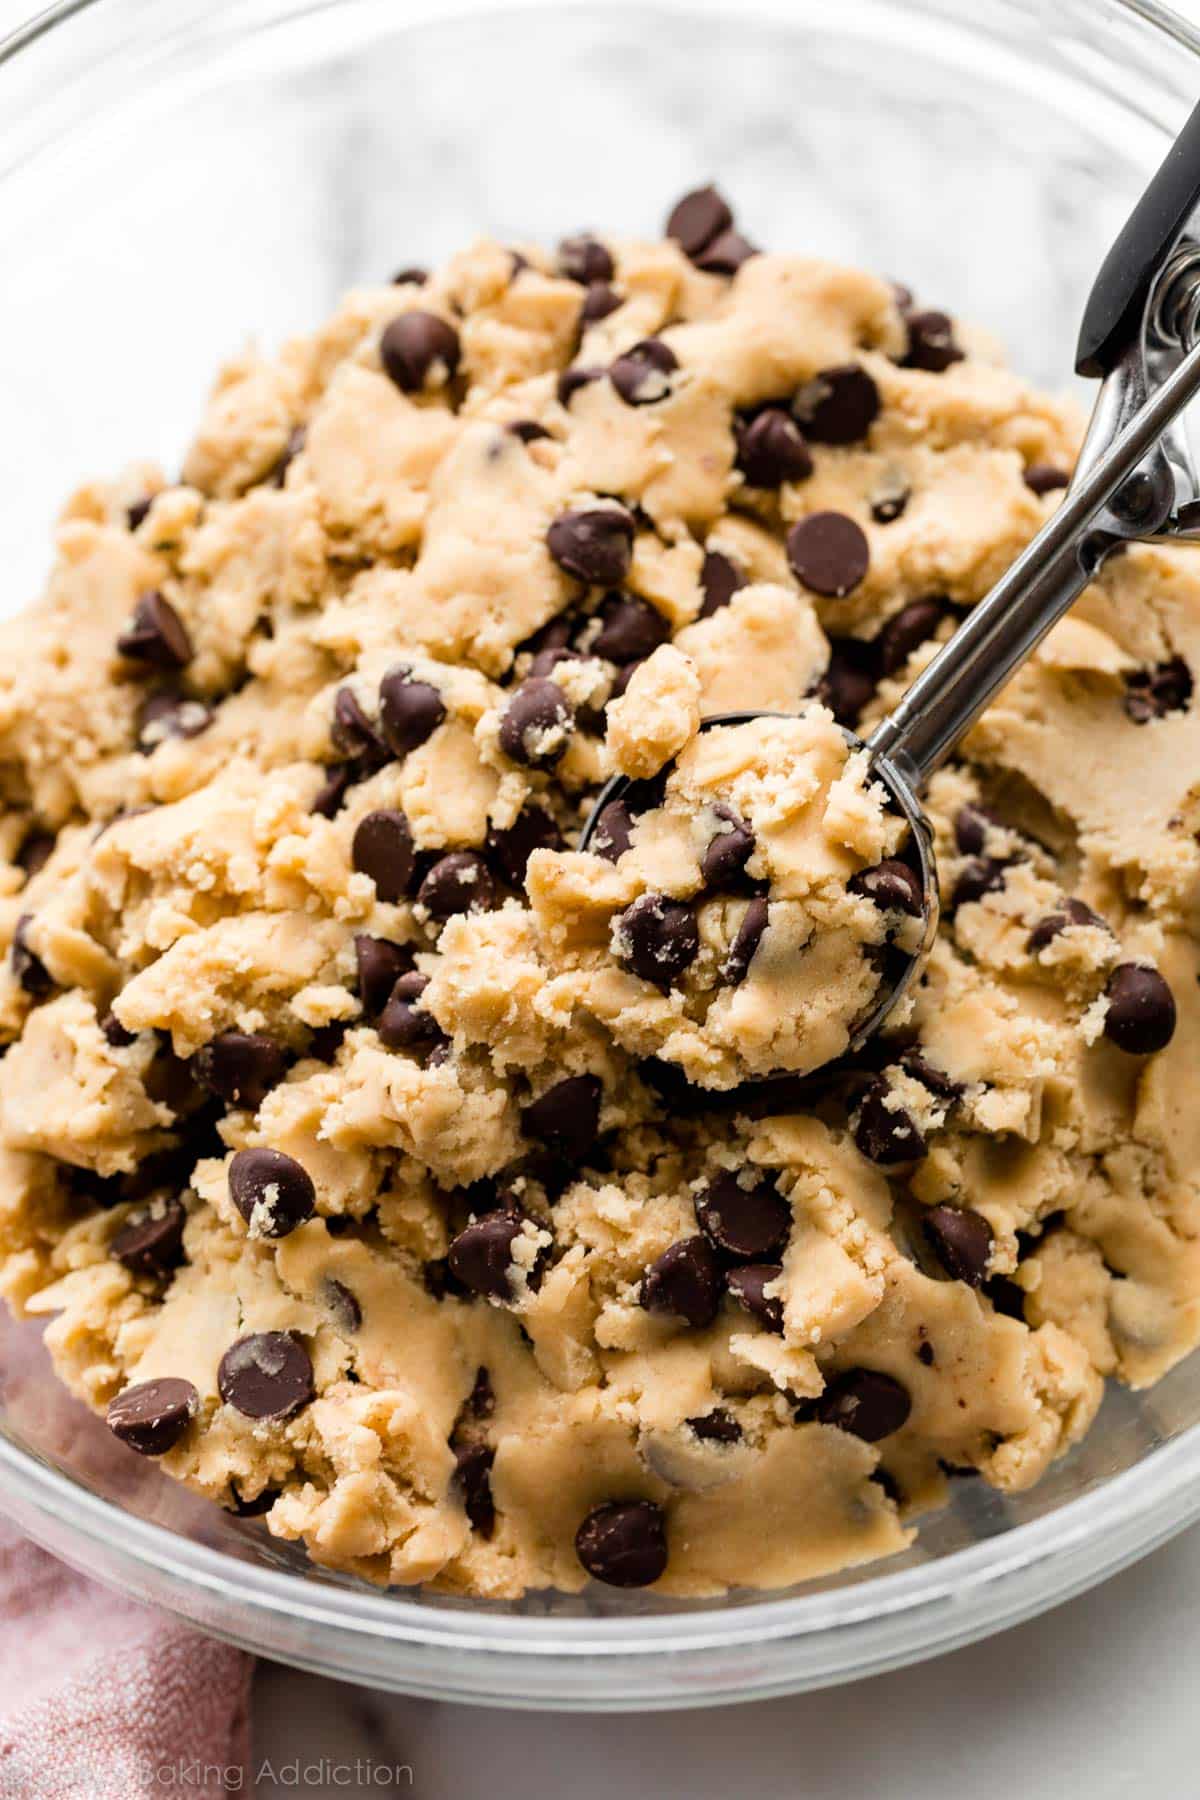 Pour the chocolate chip cookie dough out of a glass bowl with a cookie spoon